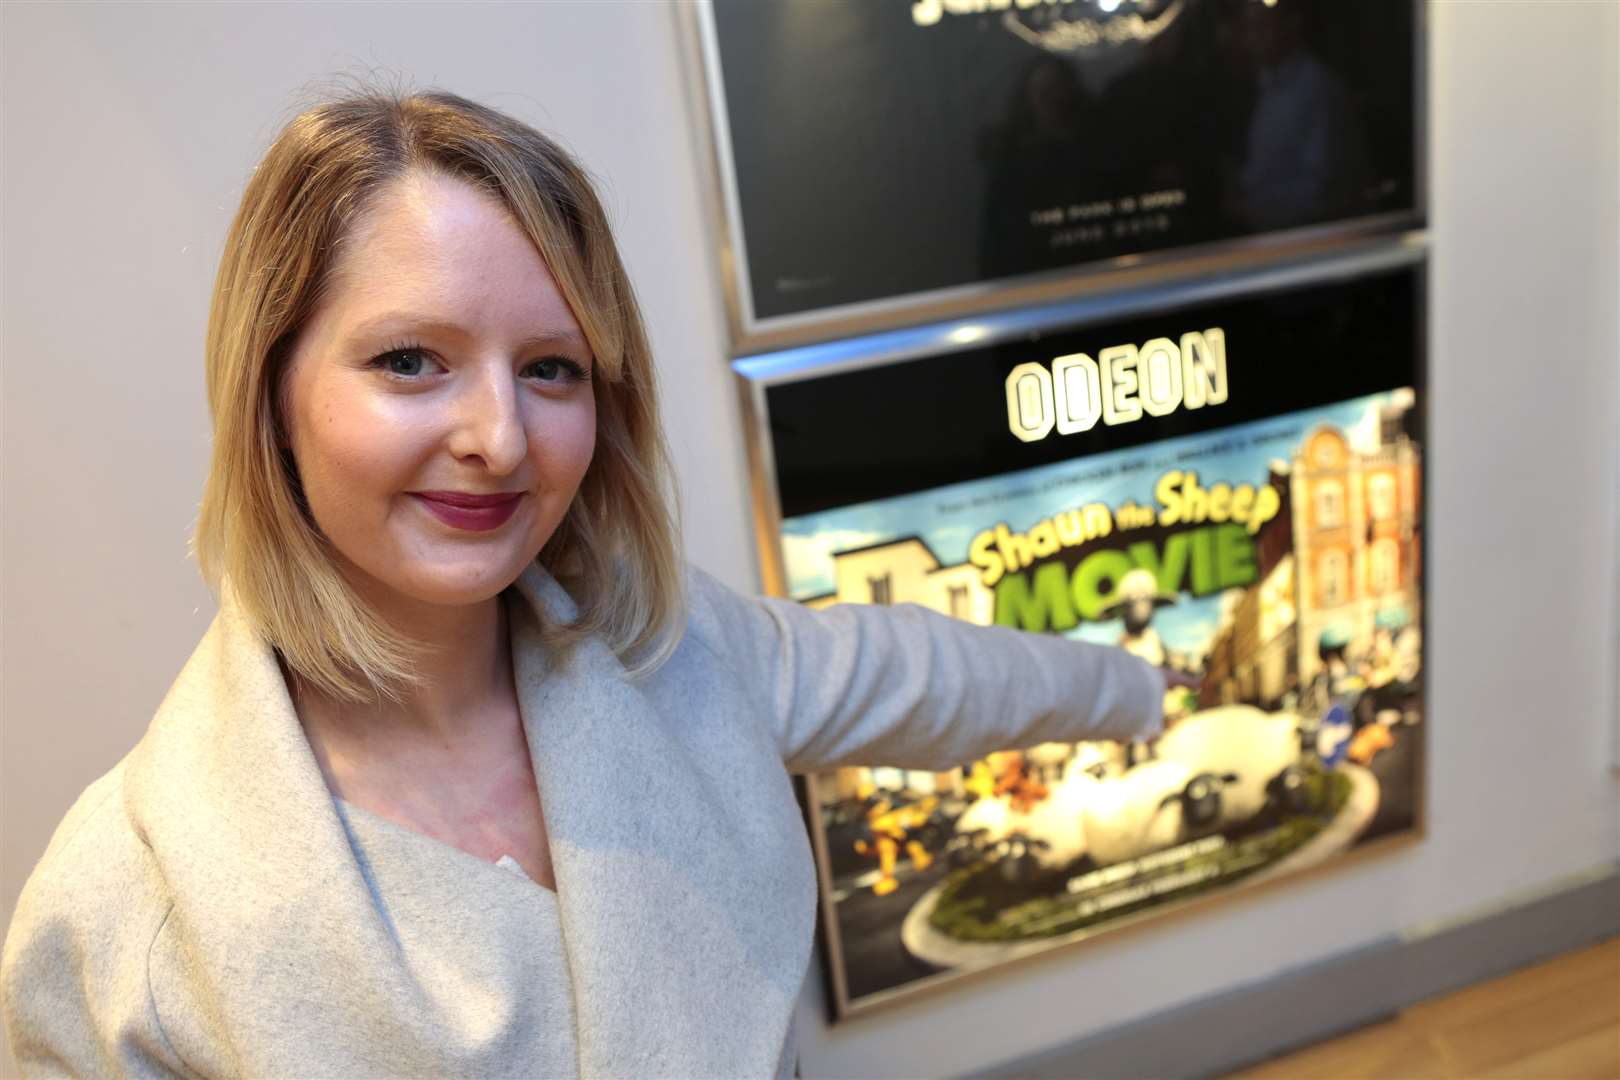 Emma with the poster for the film she worked on, Shaun the Sheep